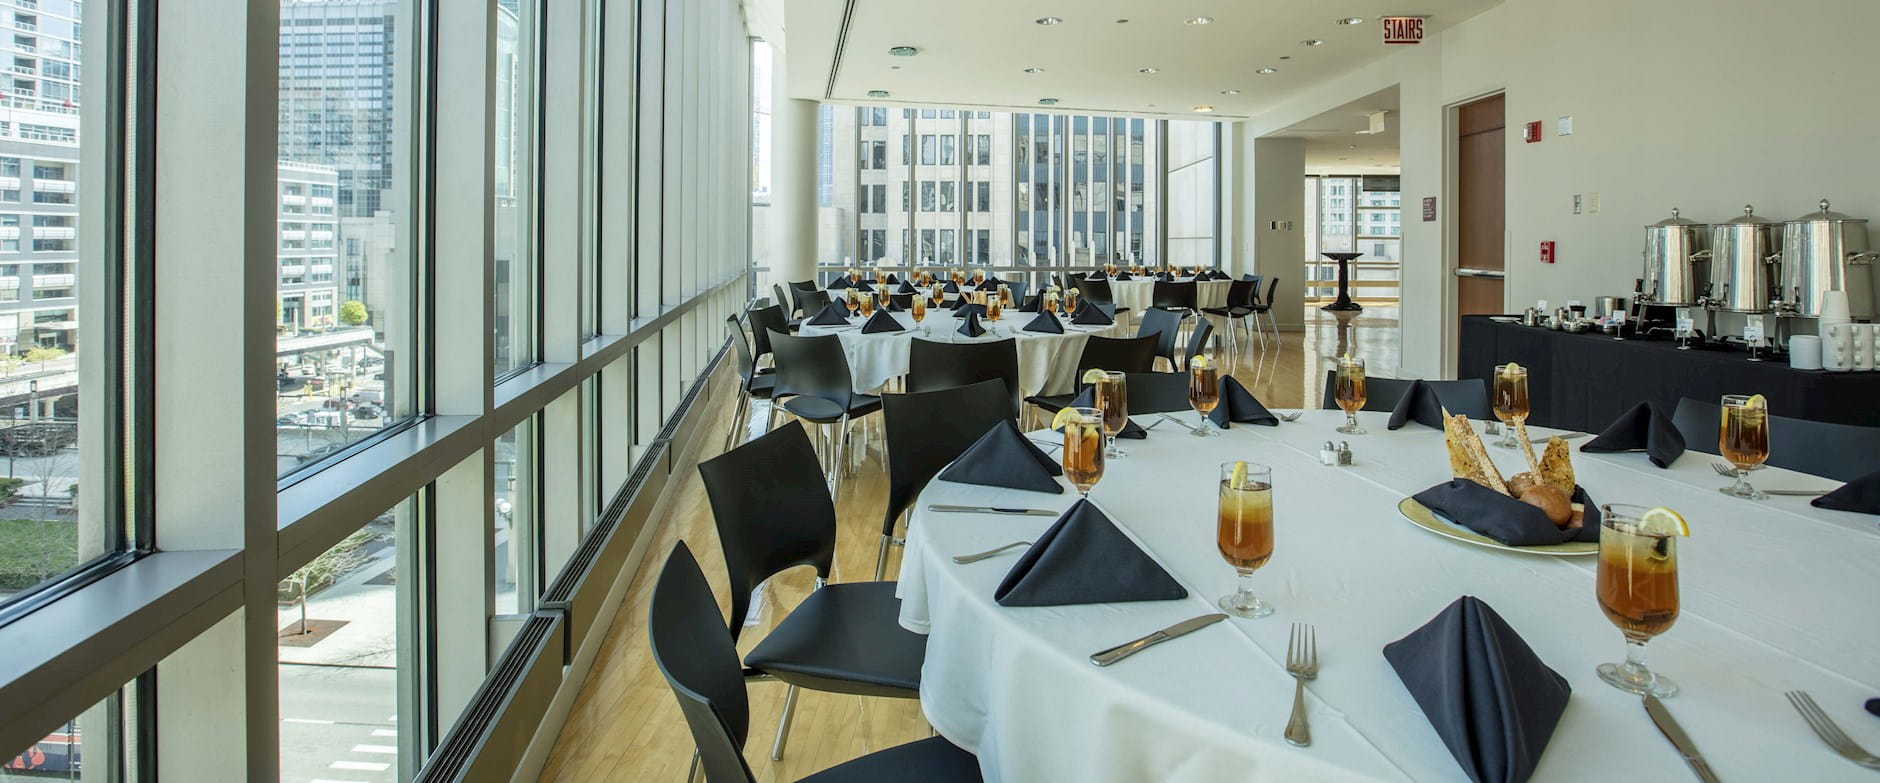 Large, circular tables surrounded by chairs line bight floor-to-ceiling walls in a large dining room at the Gleacher Center